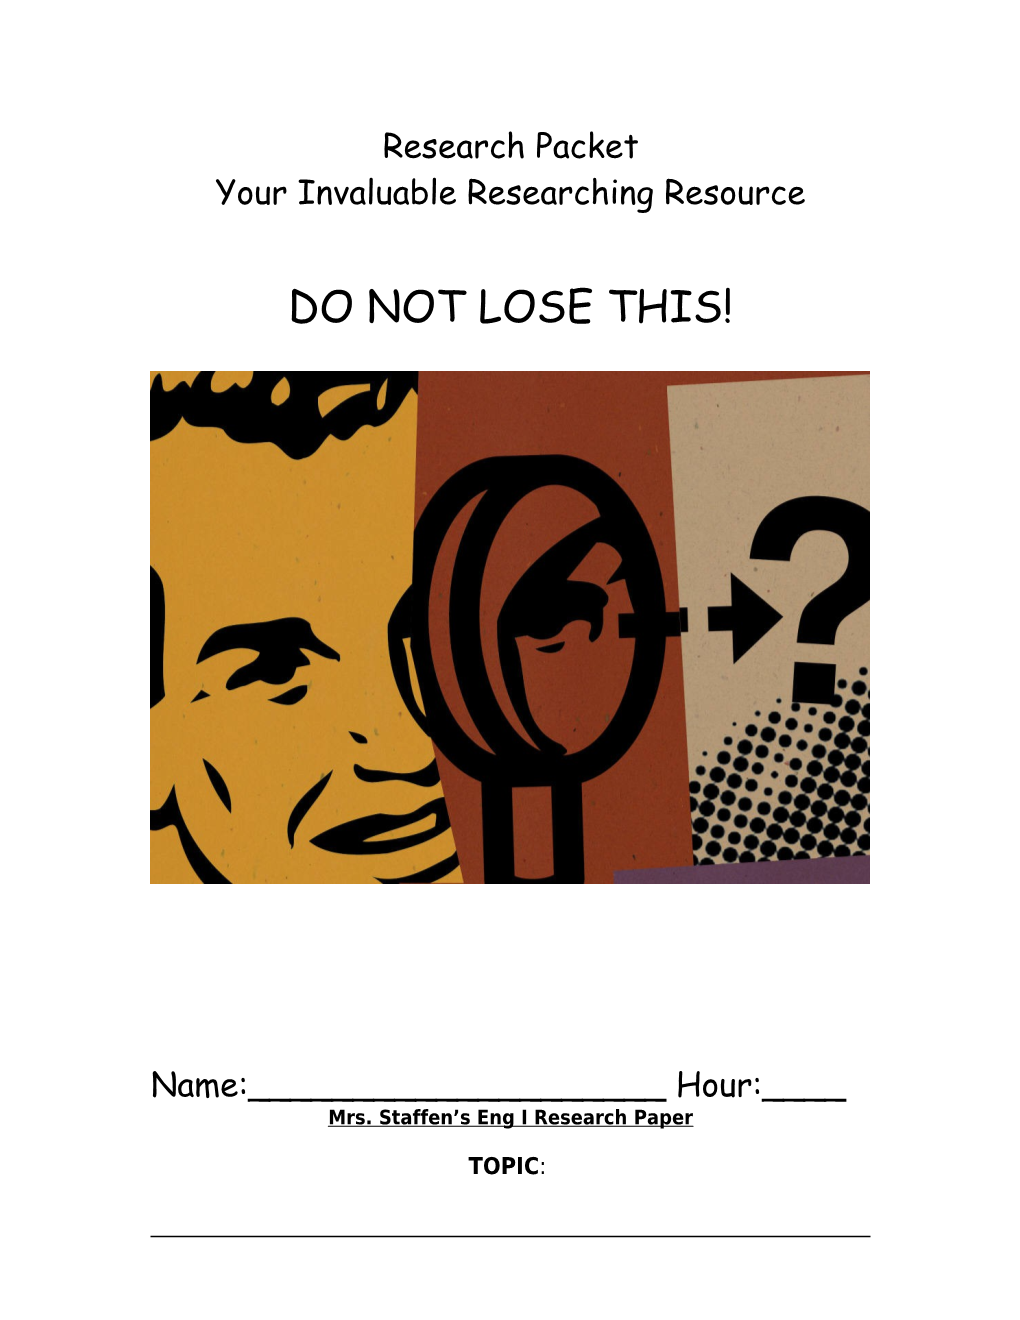 Your Invaluable Researching Resource